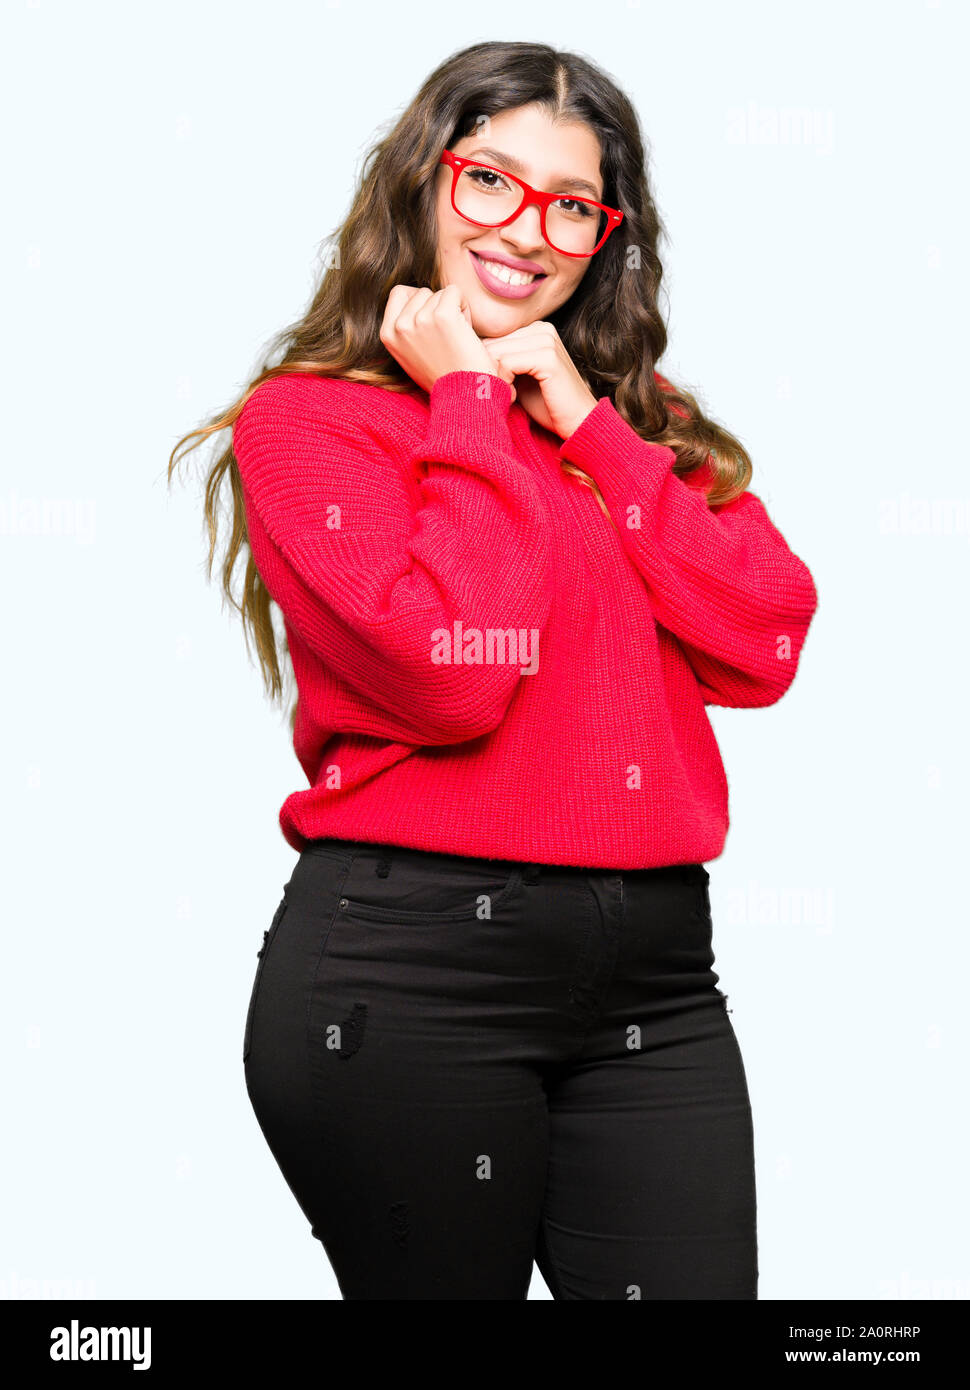 Young beautiful woman wearing red glasses with hand on chin thinking about question, pensive expression. Smiling with thoughtful face. Doubt concept. Stock Photo